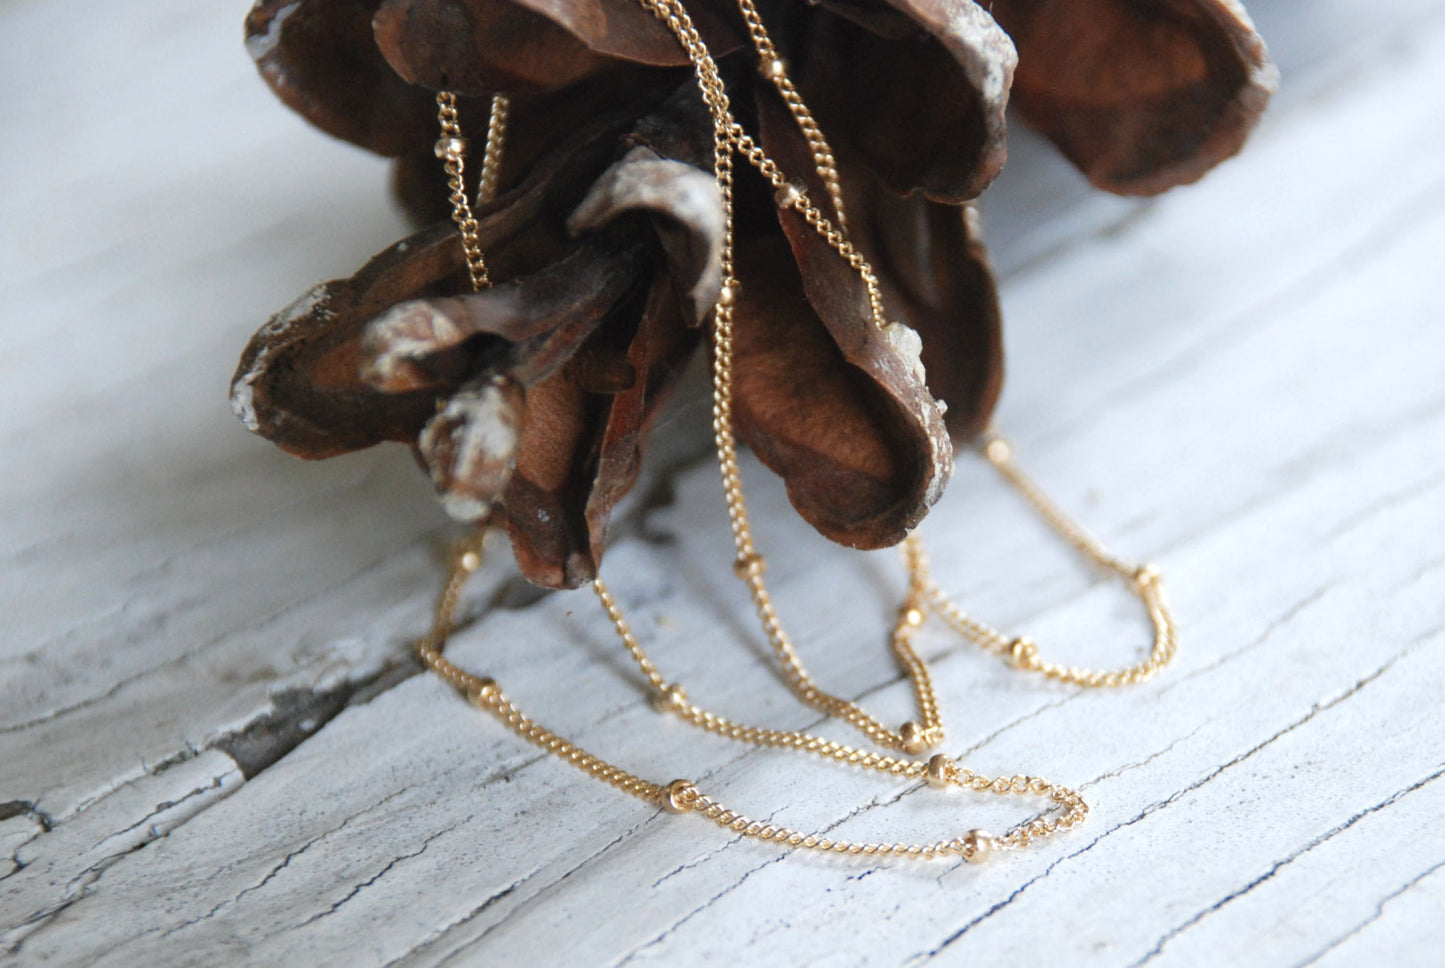 Necklace Design Your Own Series -  14kt Goldfill Satellite Chain